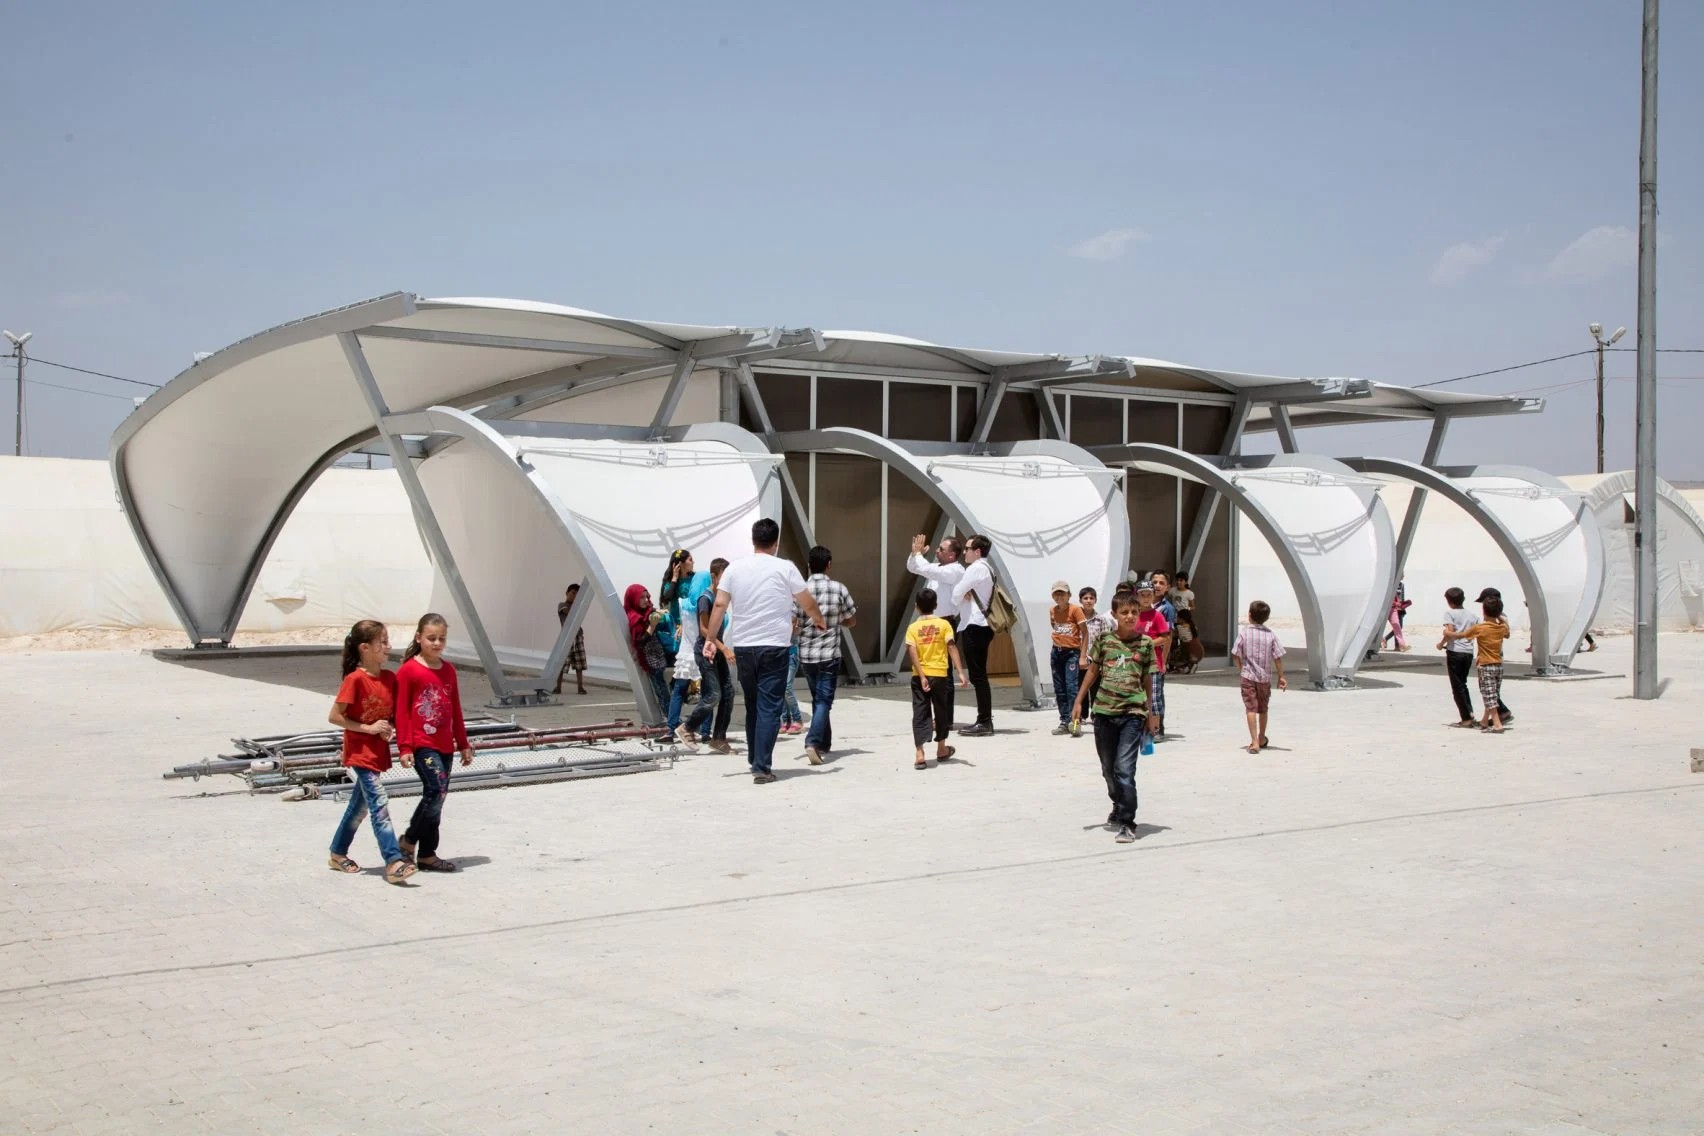 Modular tent classrooms for refugees by Zaha Hadid Architects